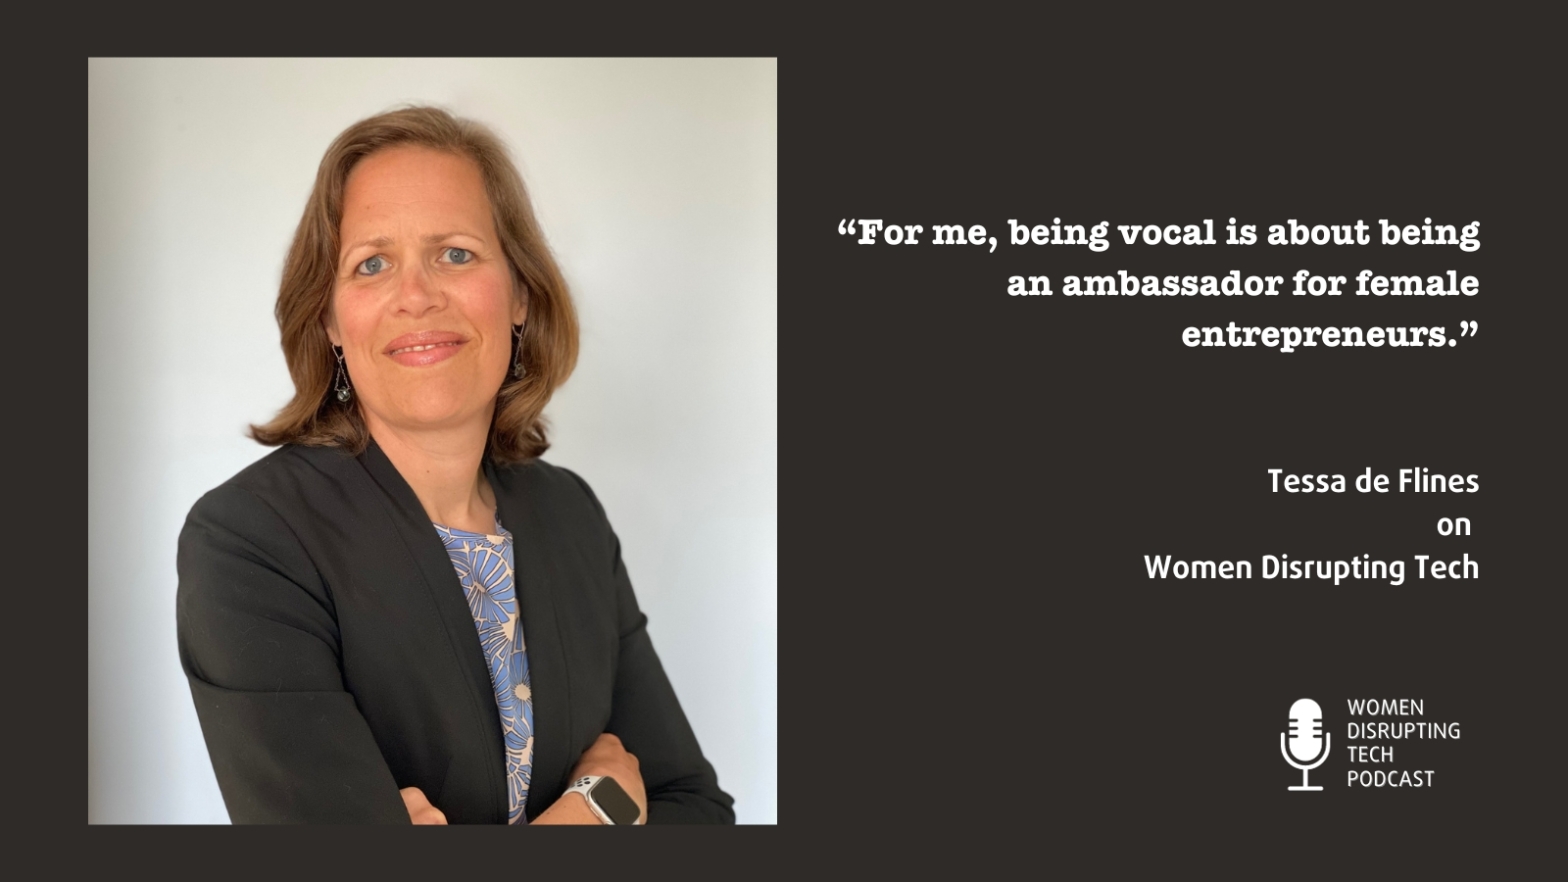 Picture of Tessa de Flines, angel investor and co-founder of Masters of Scale, with a quote from the interview with her on the podcast Women Disrupting Tech. Click on the link in the post to listen or search for "Women Disrupting Tech" in your favorite podcast app.